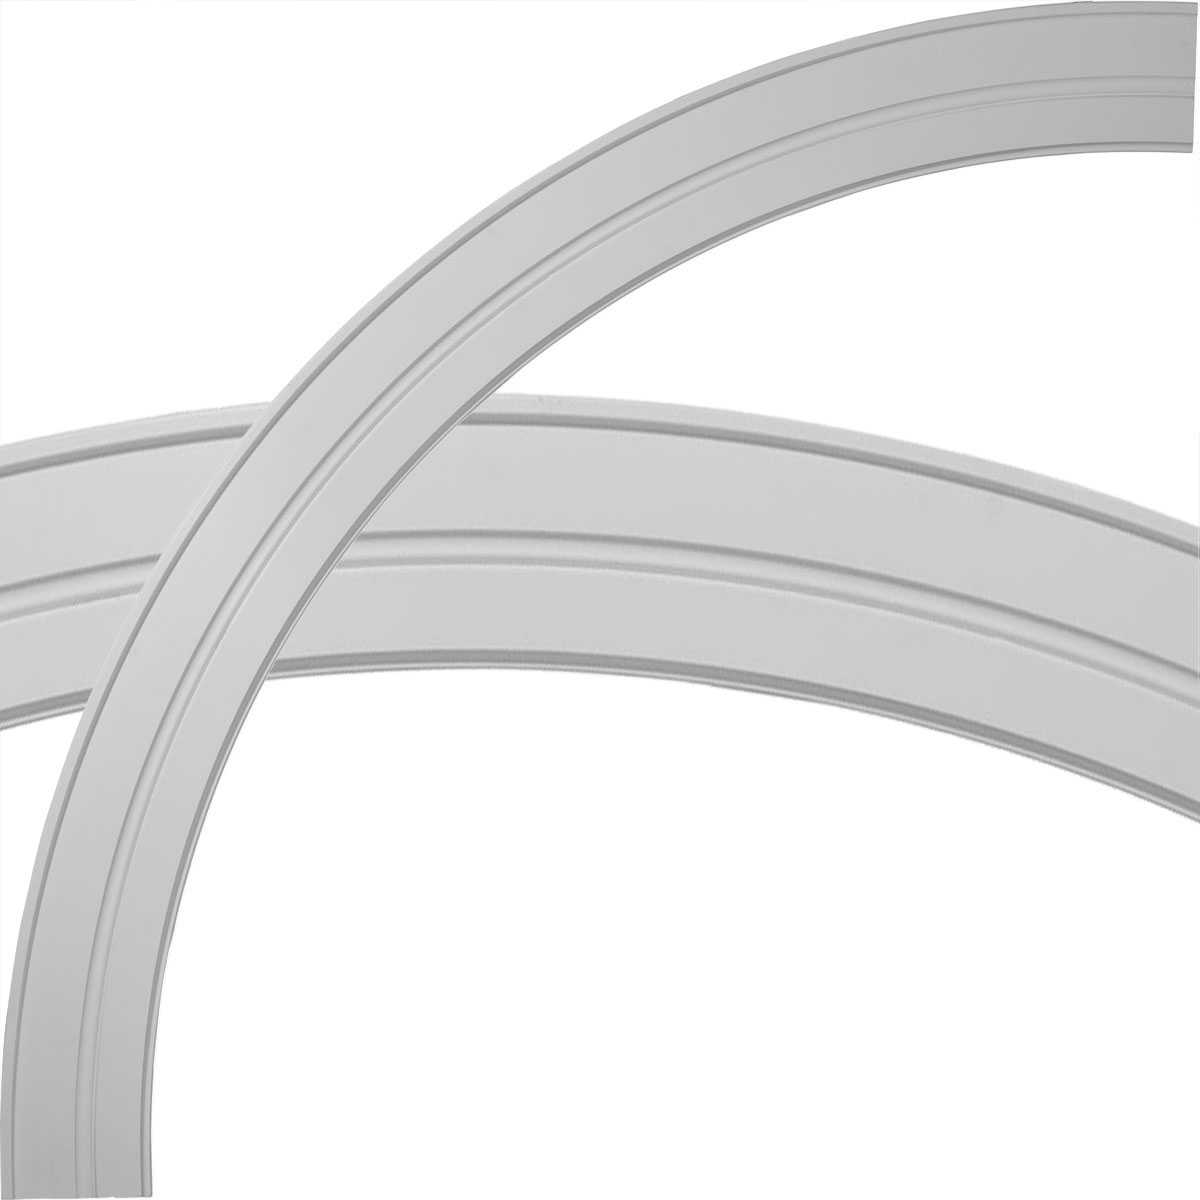 84 3/4'OD x 74 1/4'ID x 5 1/4'W x 1'P Milton Ceiling Ring (1/4 of complete circle)